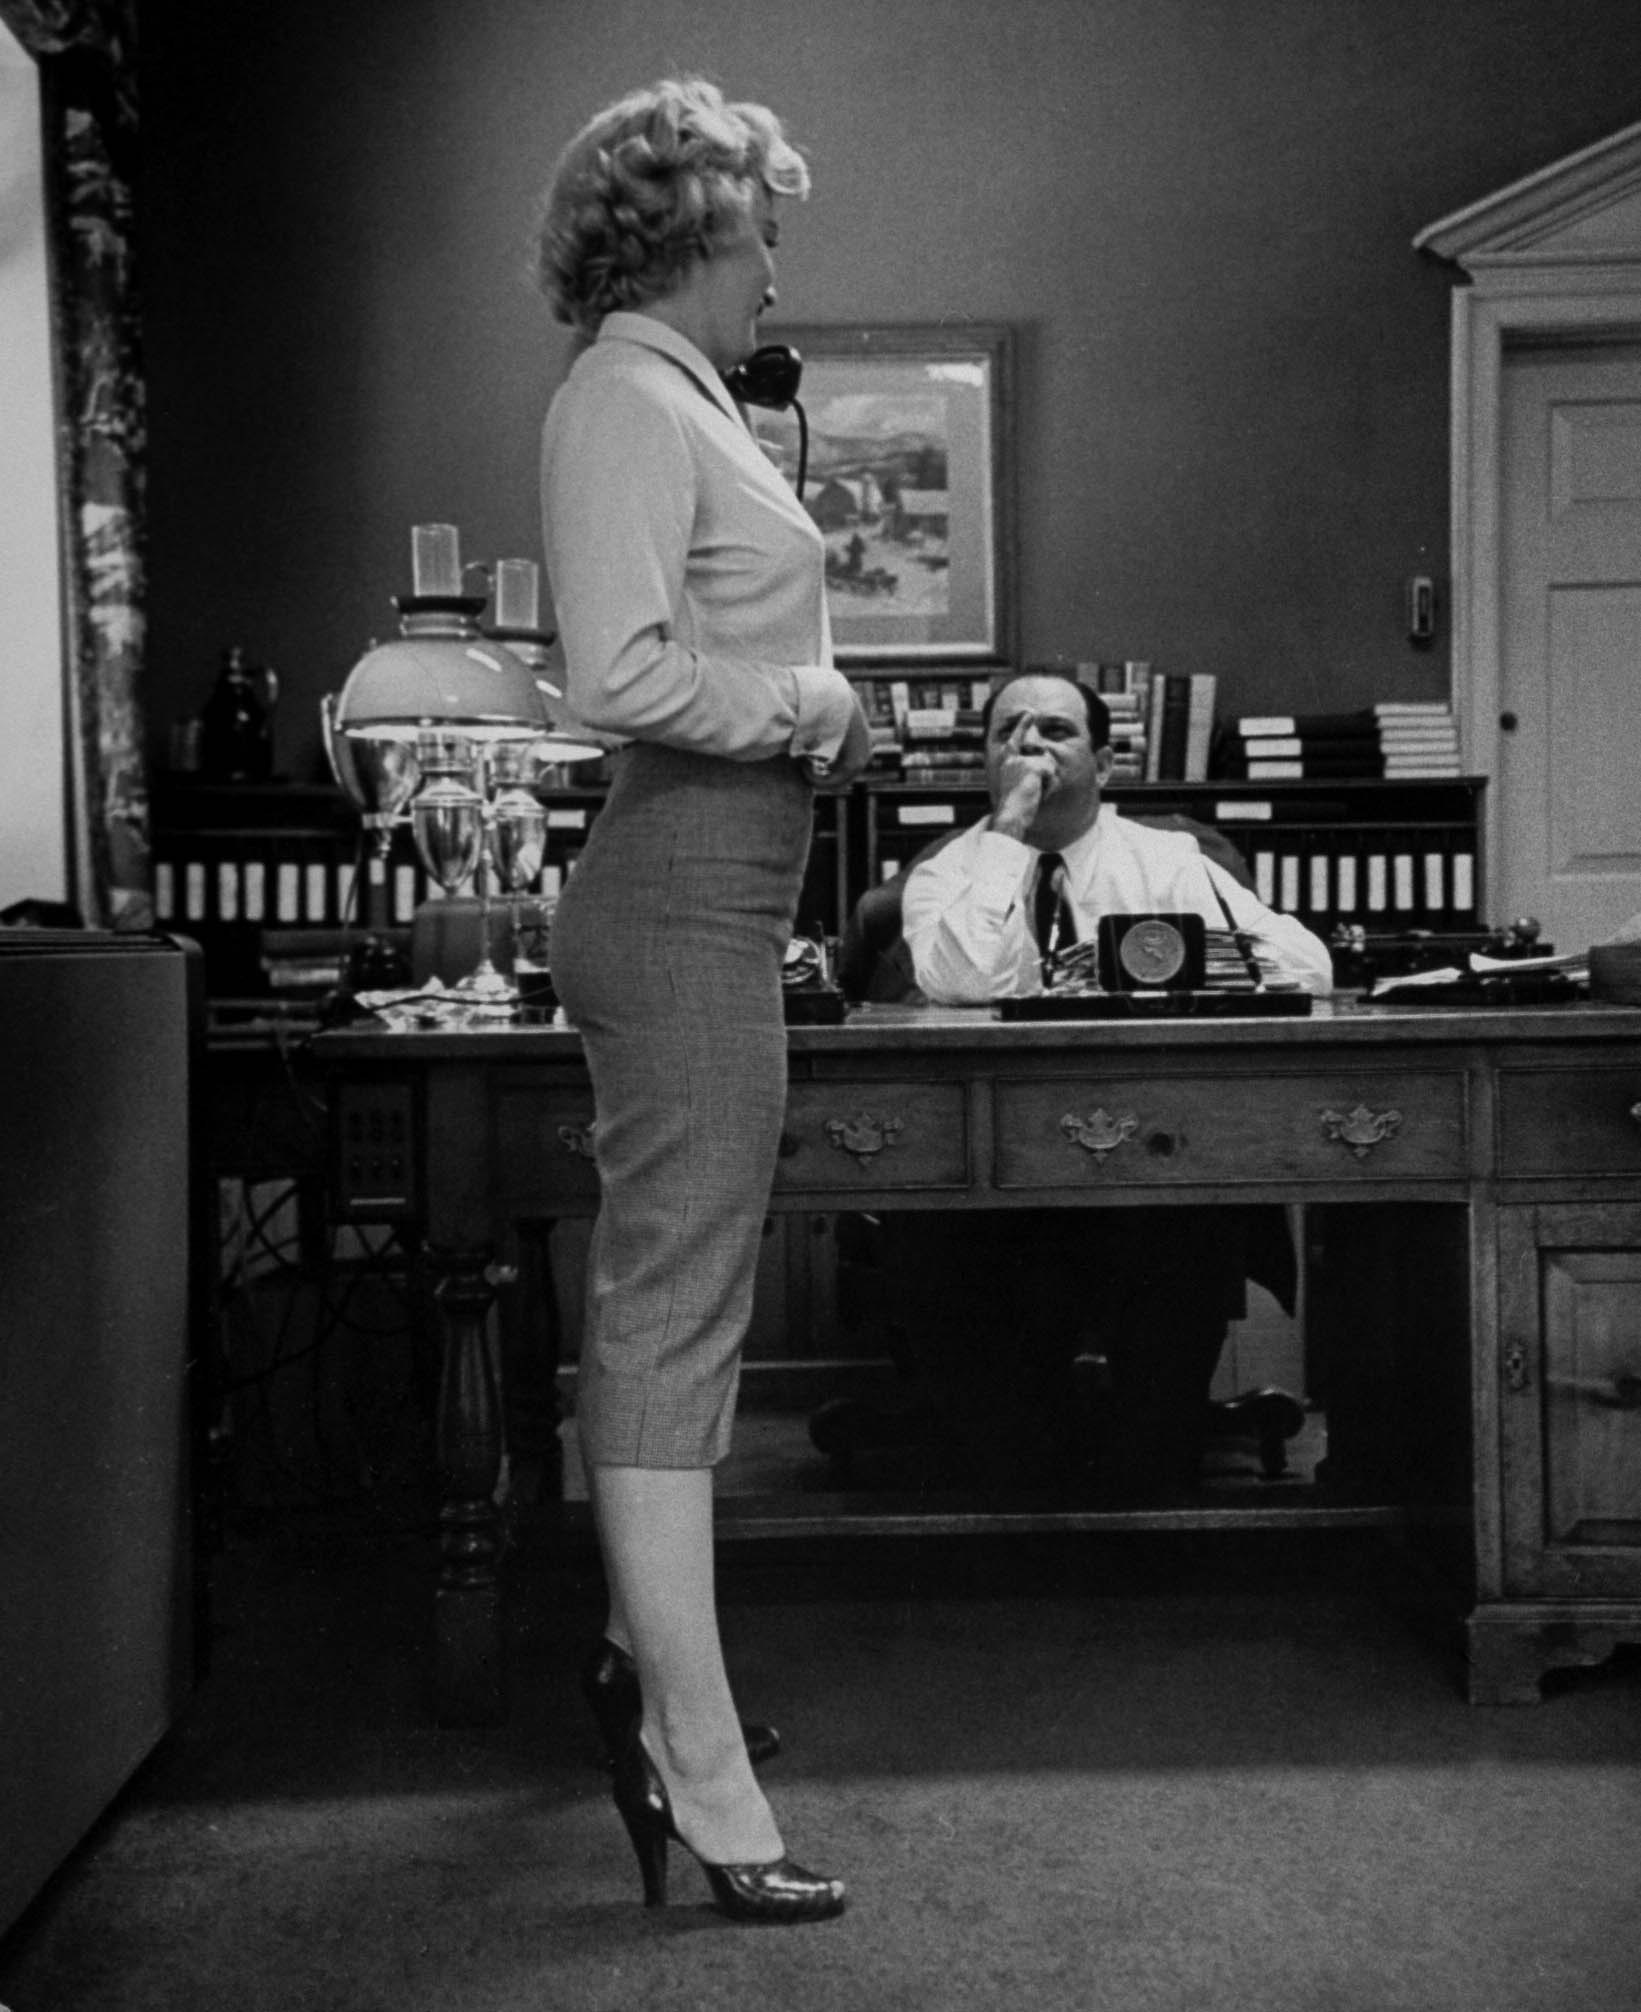 Marilyn Monroe talking on the phone while displaying her talents for movie producer Jerry Wald who is interviewing her for a role in Clifford Odets movie "Clash by Night" which he is producing, in his office. 1951.